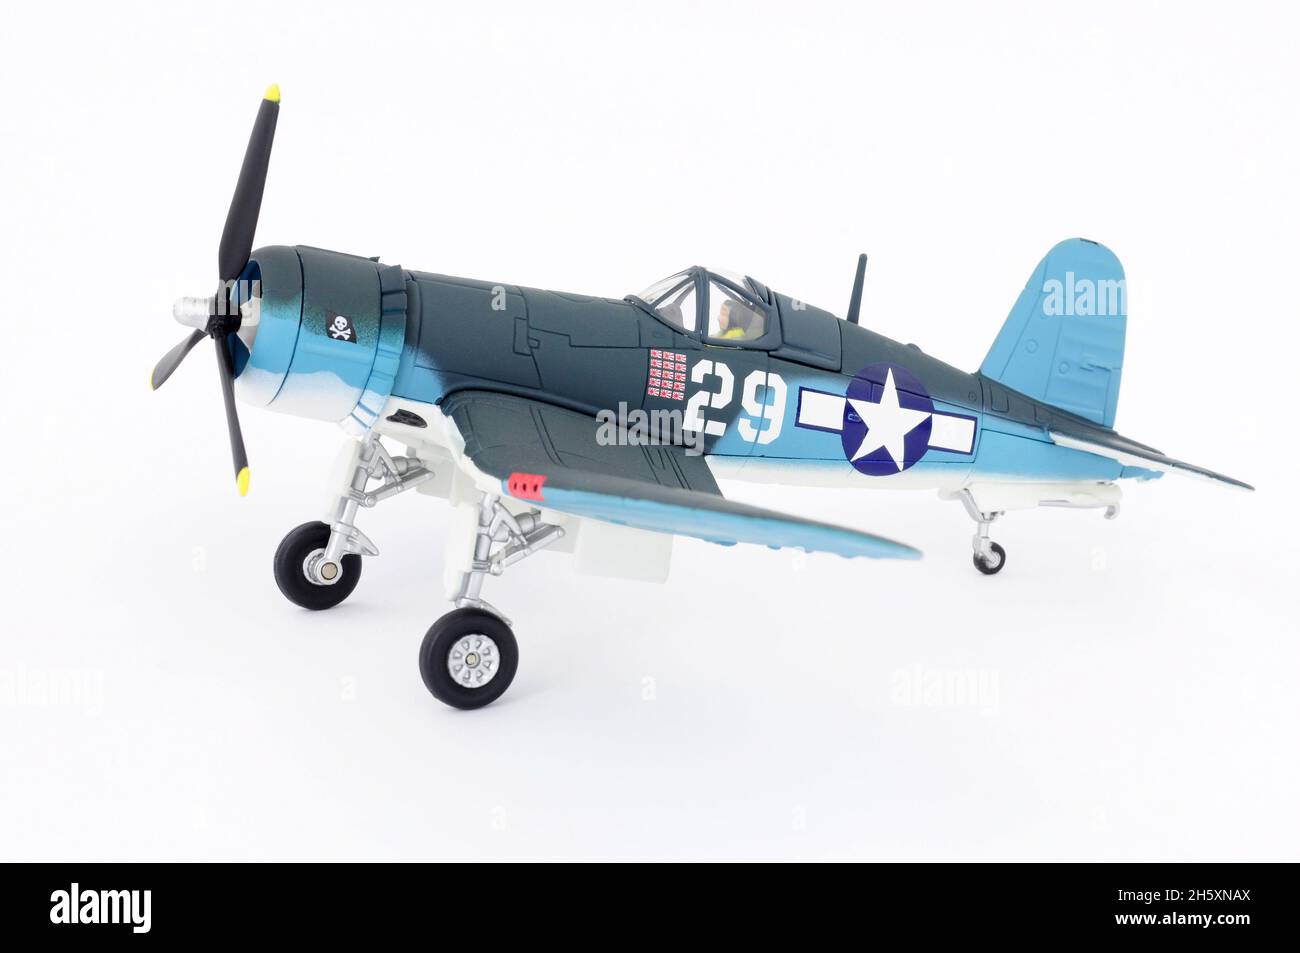 Corgi aviation archive collection die-cast metal Vought F4U-1A Corsair 1/72 model display aircraft Stock Photo